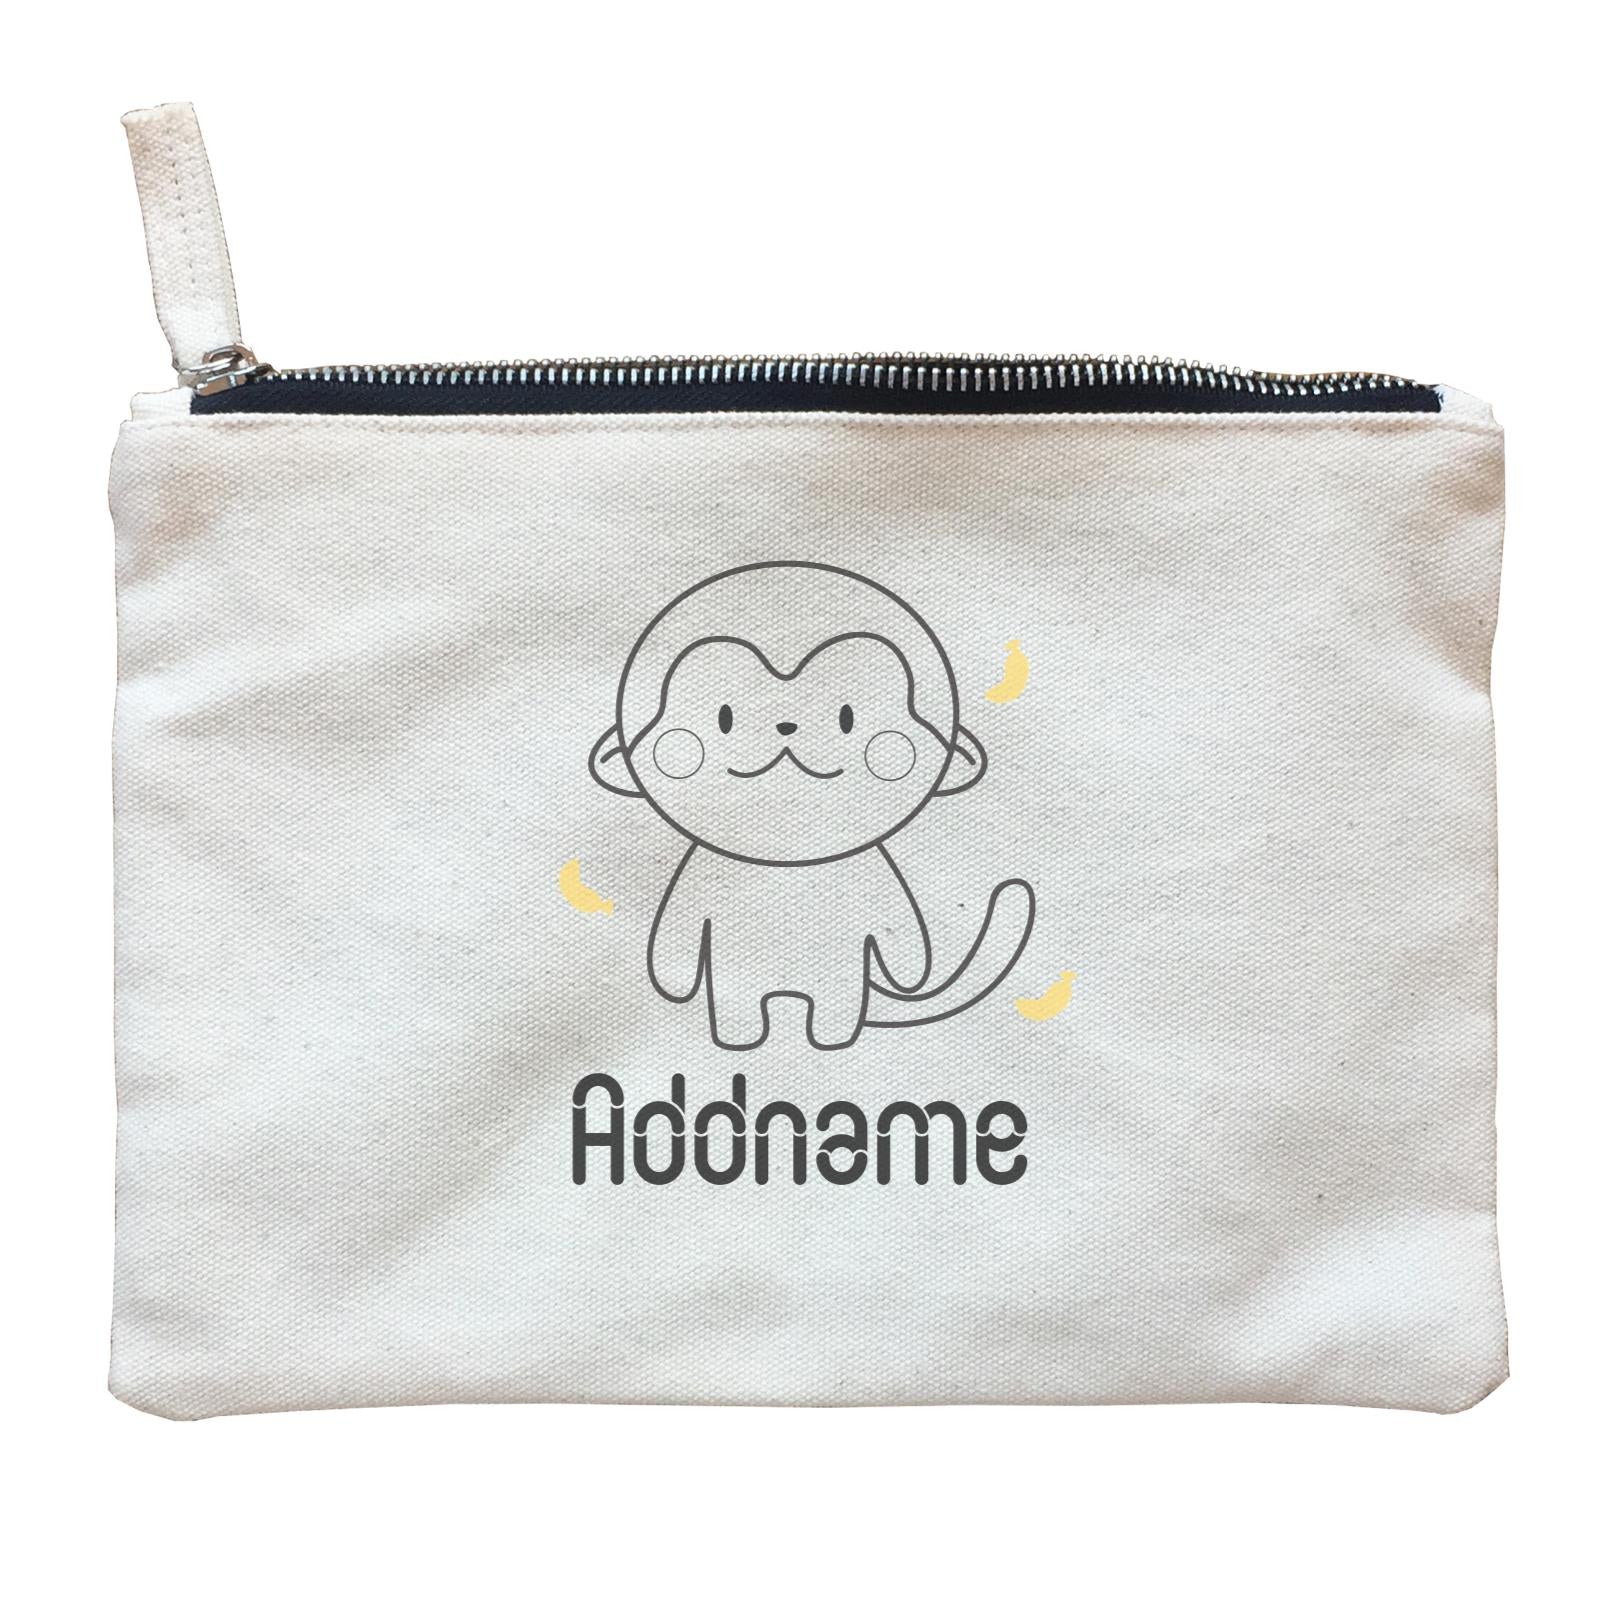 Coloring Outline Cute Hand Drawn Animals Furry Monkey Addname Zipper Pouch